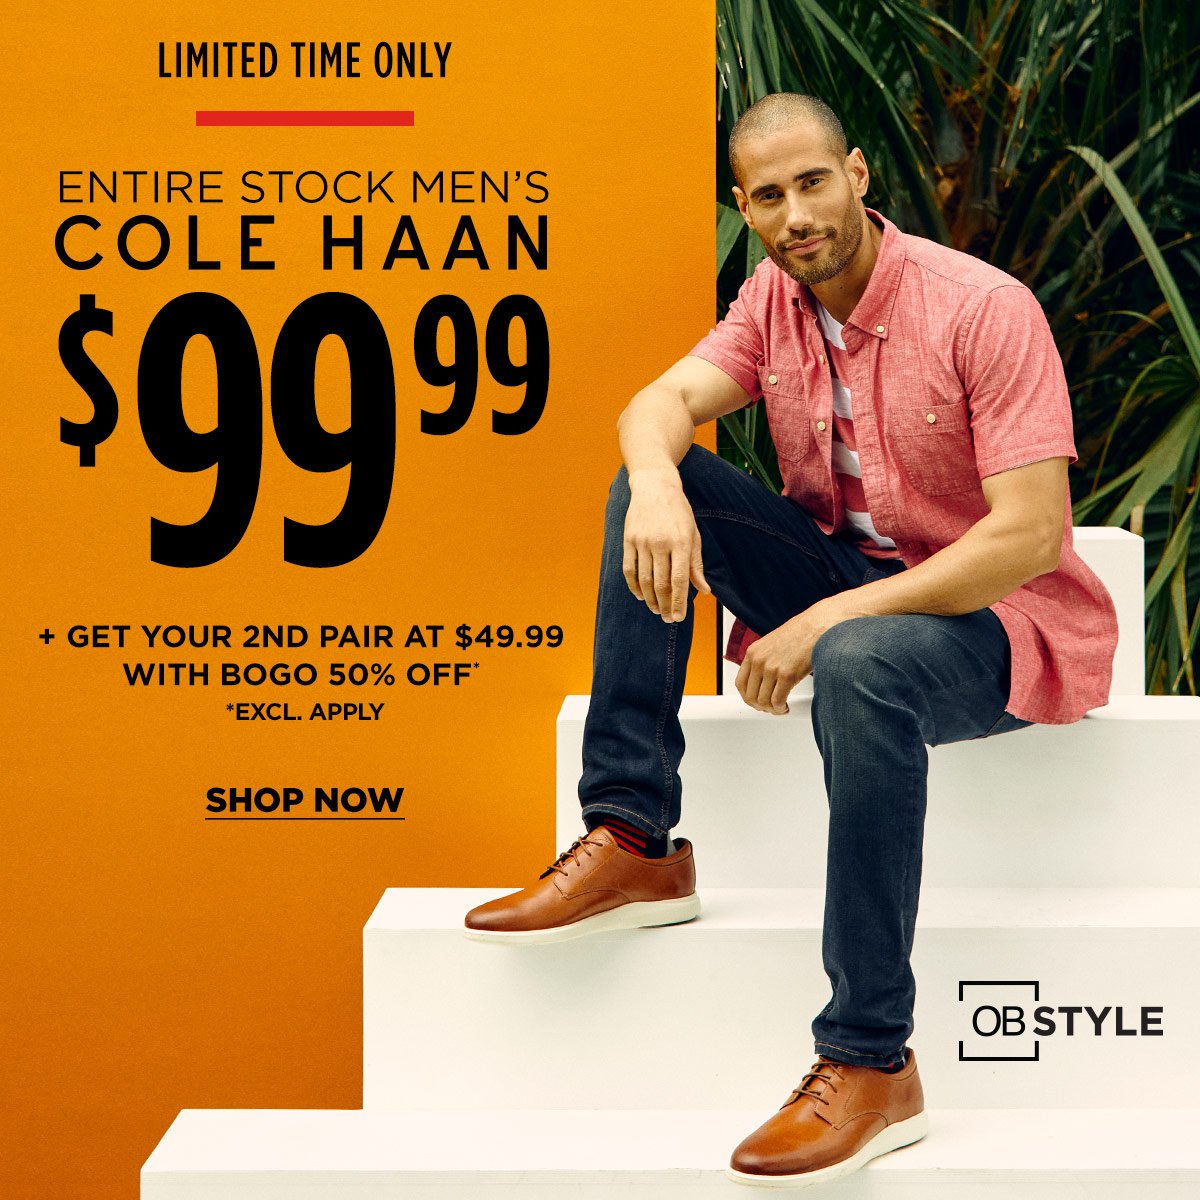 LIMITED TIME ENTIRE STOCK MEN'S COLE HAAN \\$99.99 + GET YOUR 2ND PAIR AT \\$49.99 WITH BOGO 50% OFF* *EXCL. APPLY